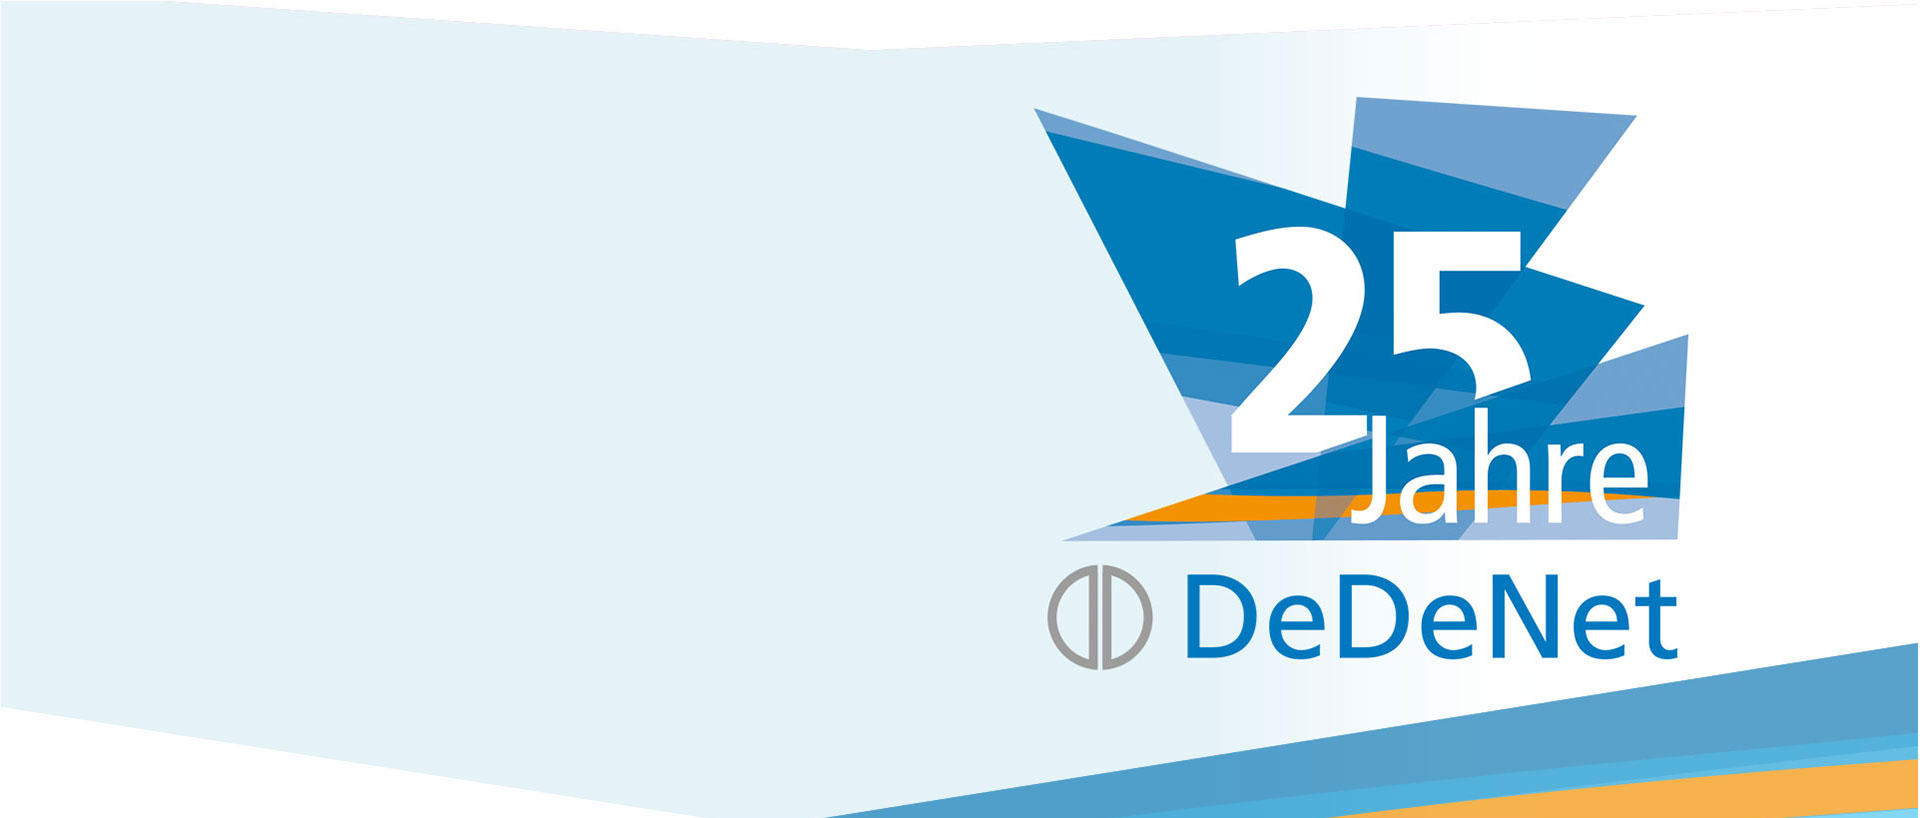 For 25 years: DeDeNet has been developing mobile IT solutions for your success. 